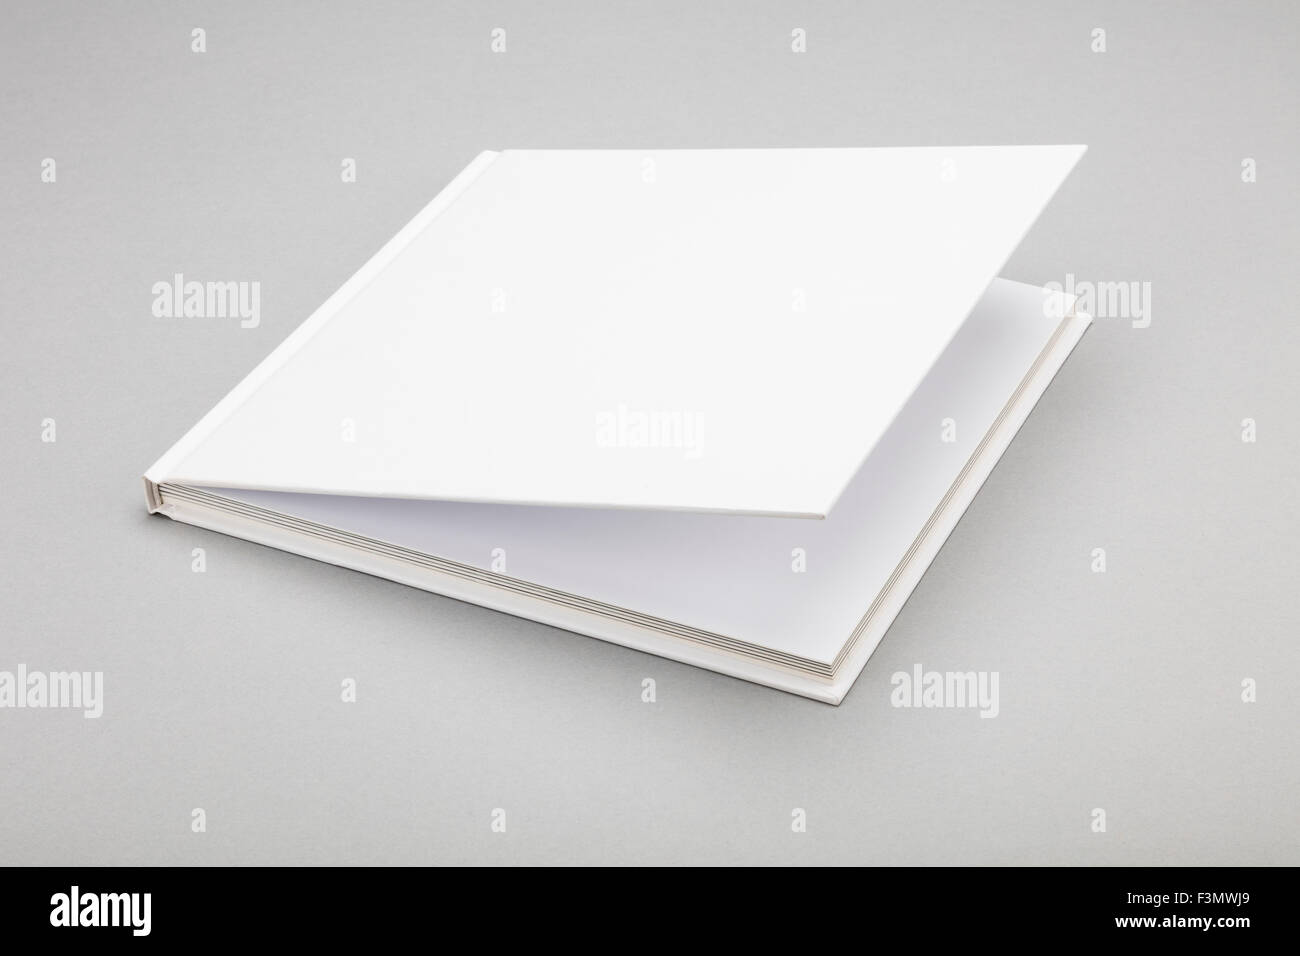 630+ Blank Book Opened To The First Page Stock Photos, Pictures